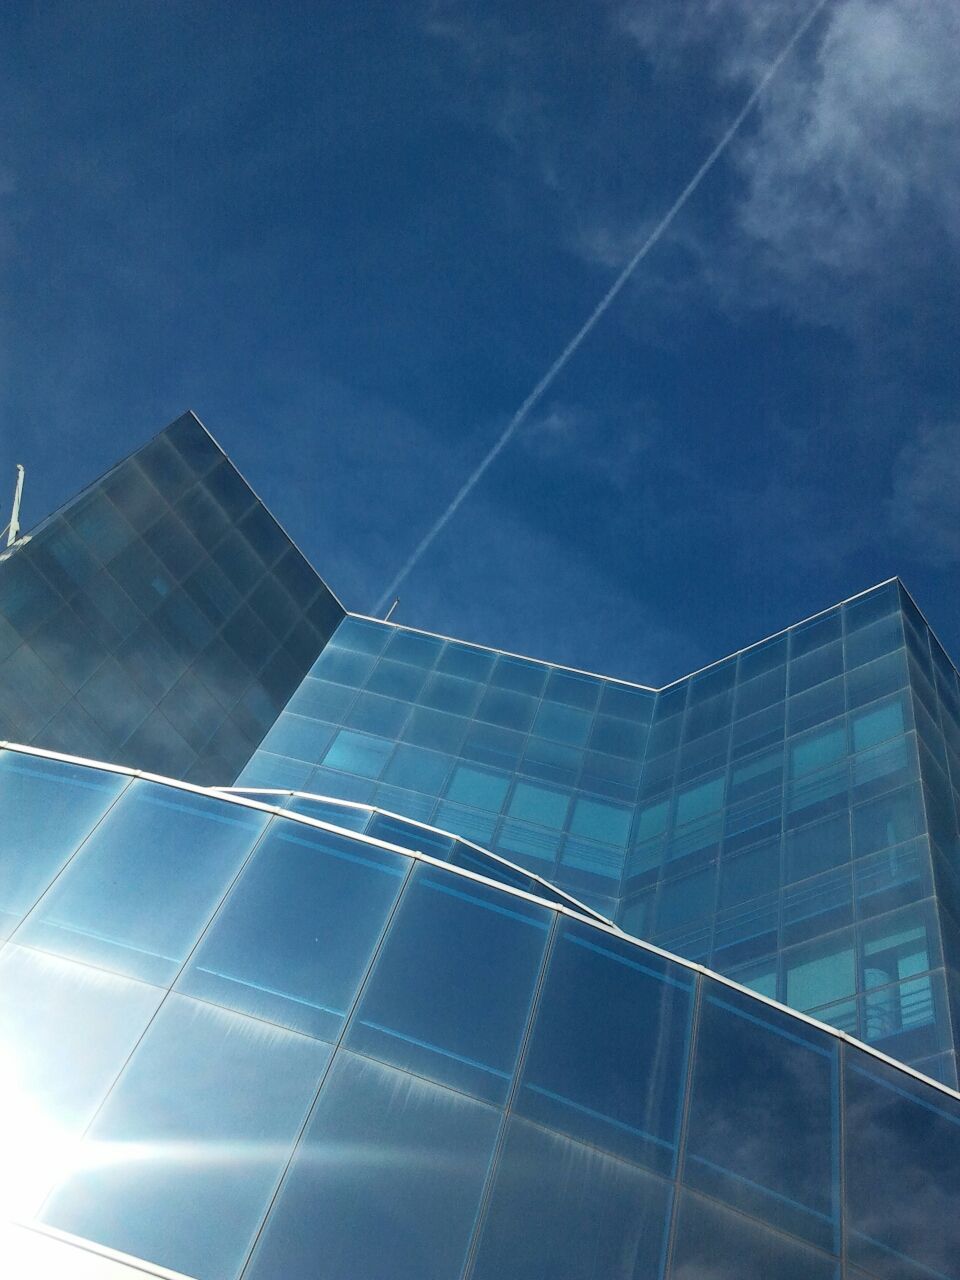 architecture, built structure, building exterior, blue, low angle view, modern, sky, city, office building, reflection, glass - material, pattern, cloud - sky, skyscraper, building, outdoors, no people, day, tall - high, cloud